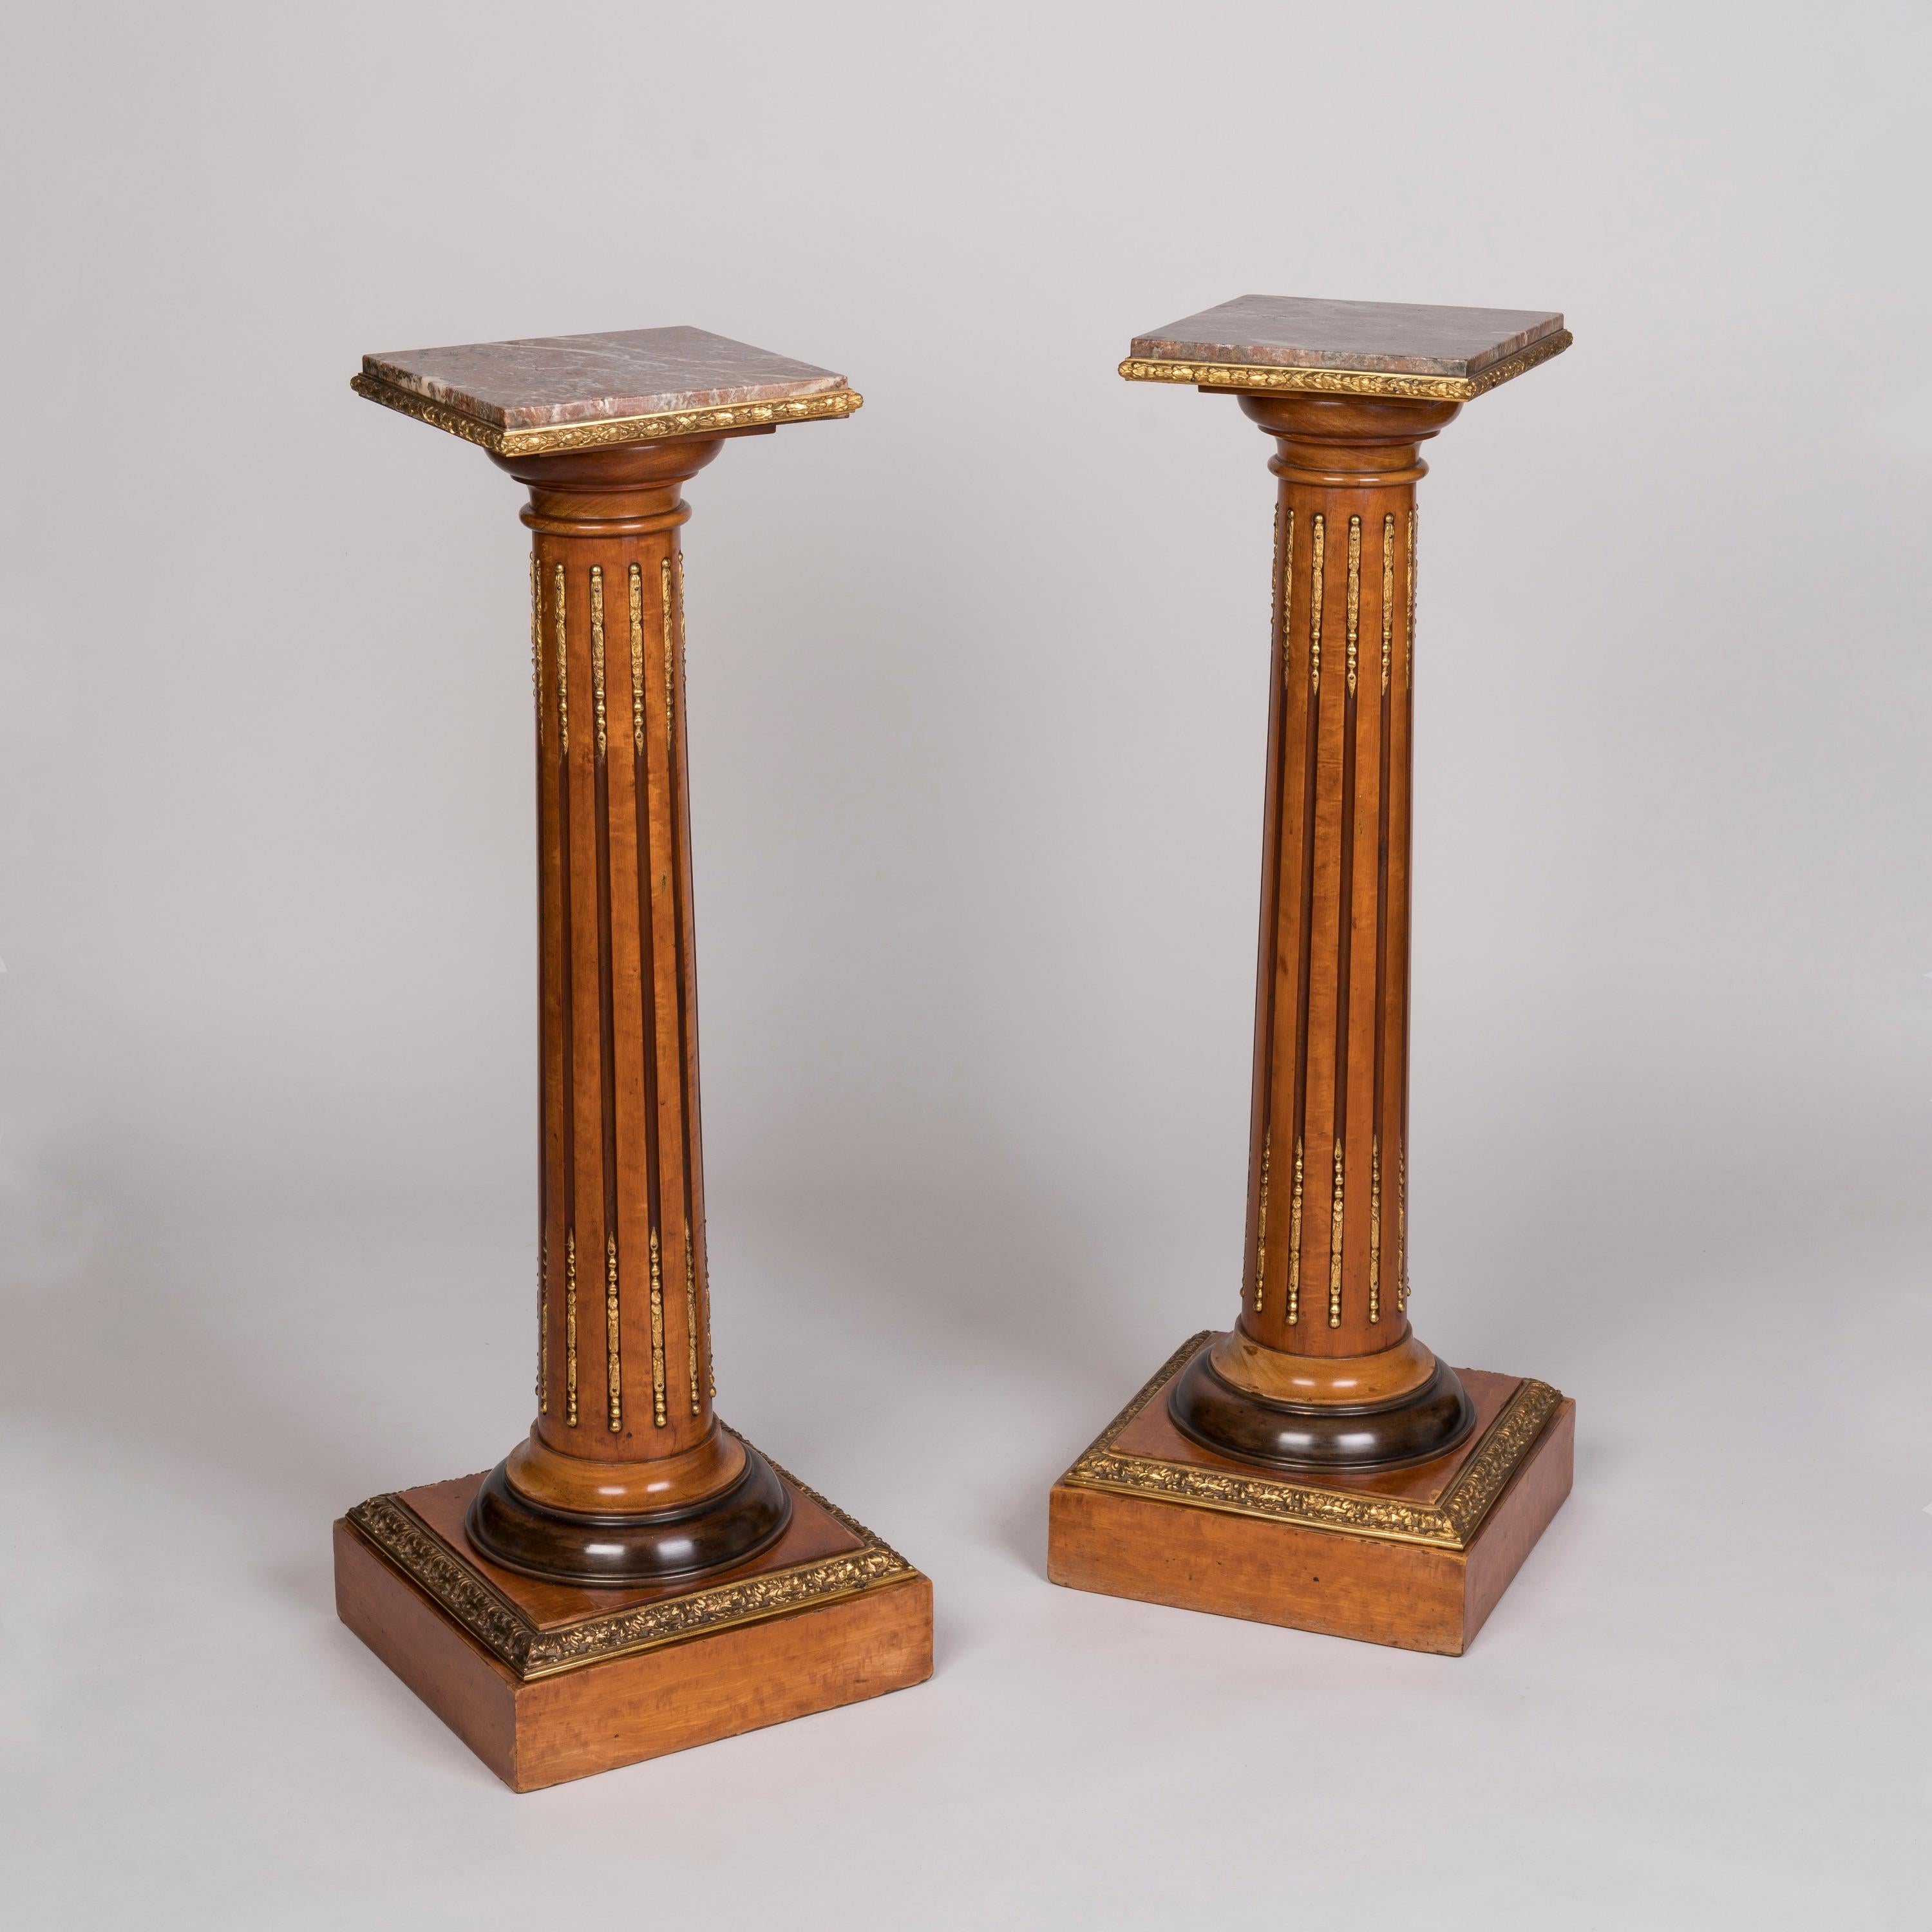 Pair of English 19th Century Ormolu-Mounted Satinwood Pedestals For Sale 1